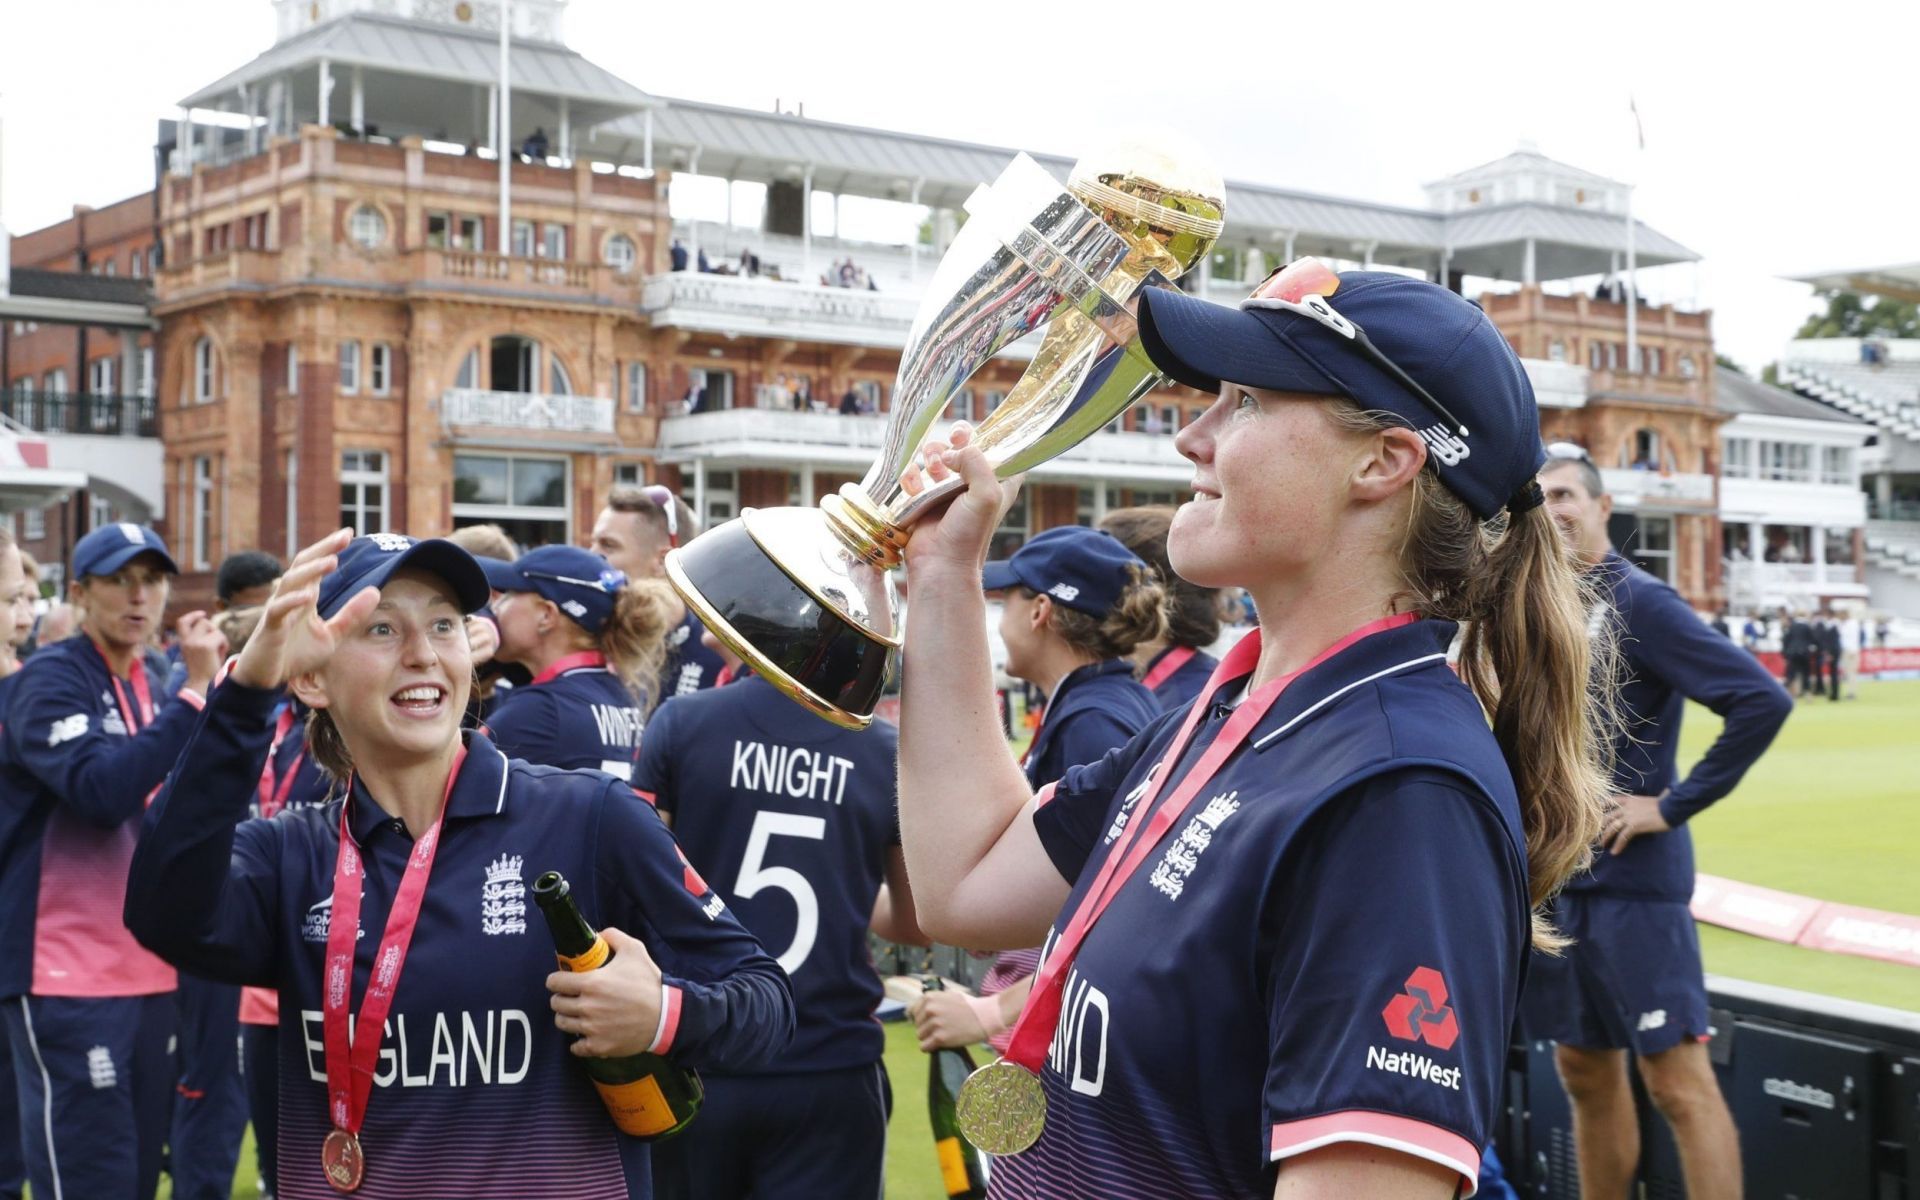 Sciver-Brunt played a crucial role